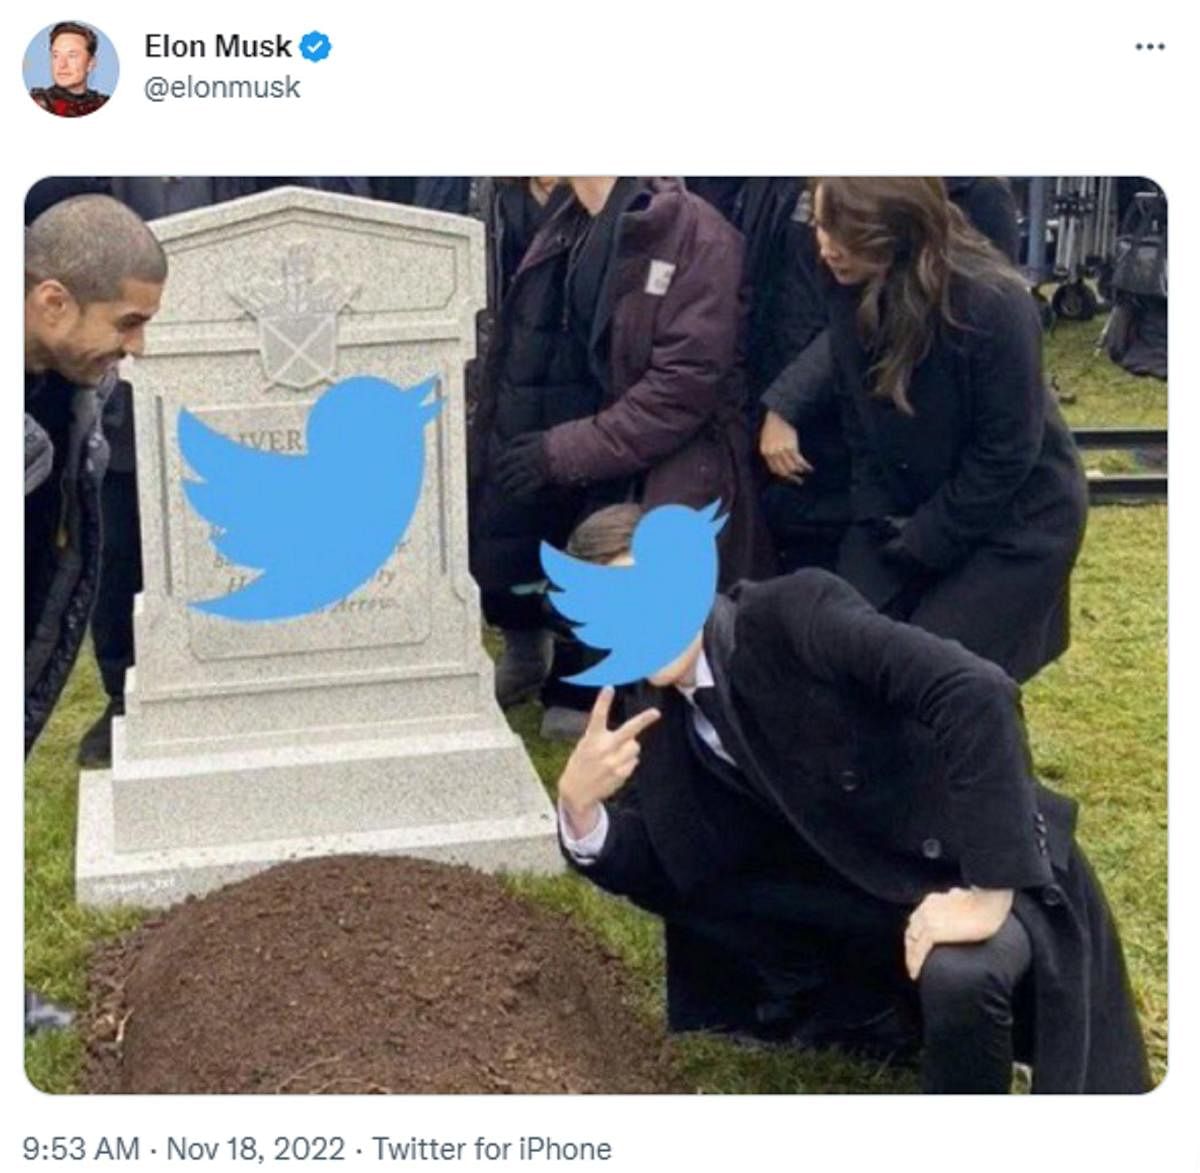 On Friday, Elon Musk posted this cryptic meme depicting Twitter being buried, triggering rumours that the microblogging site was on the verge of closure.